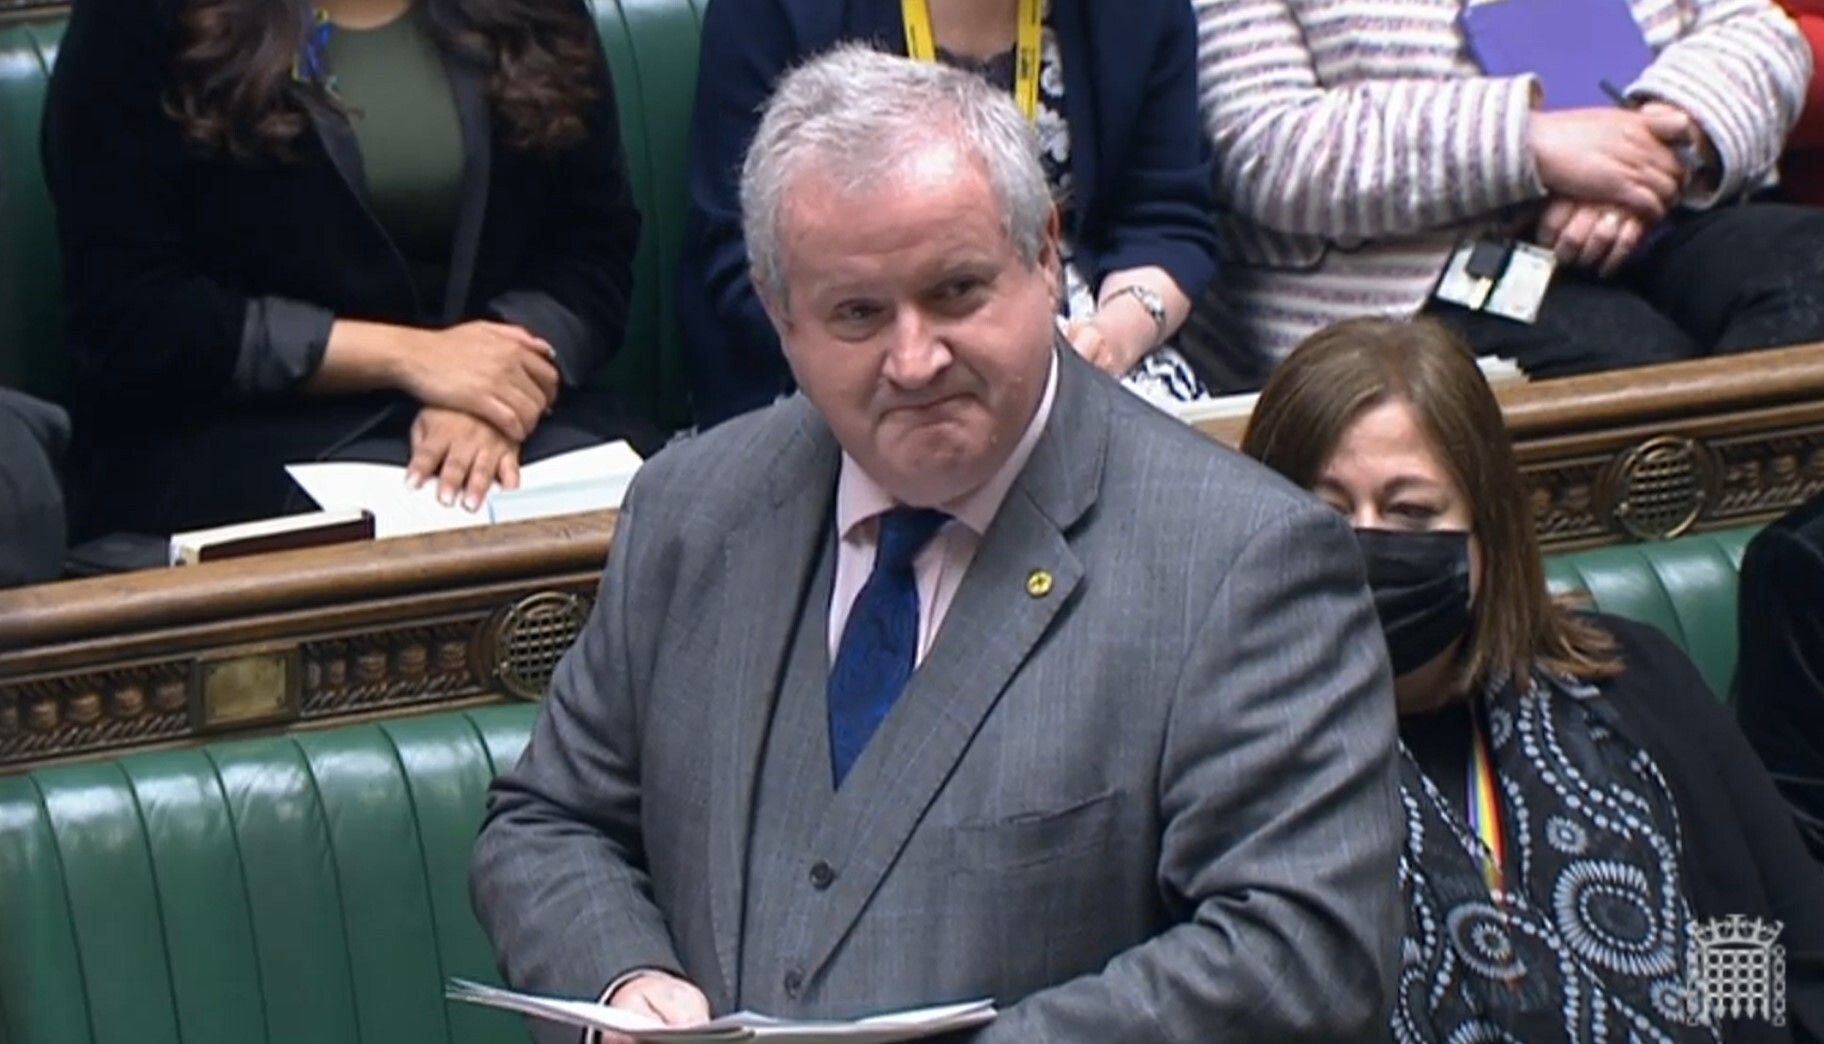 Mr Blackford said he wouldn't be seeking the Prime Minister's permission for another referendum